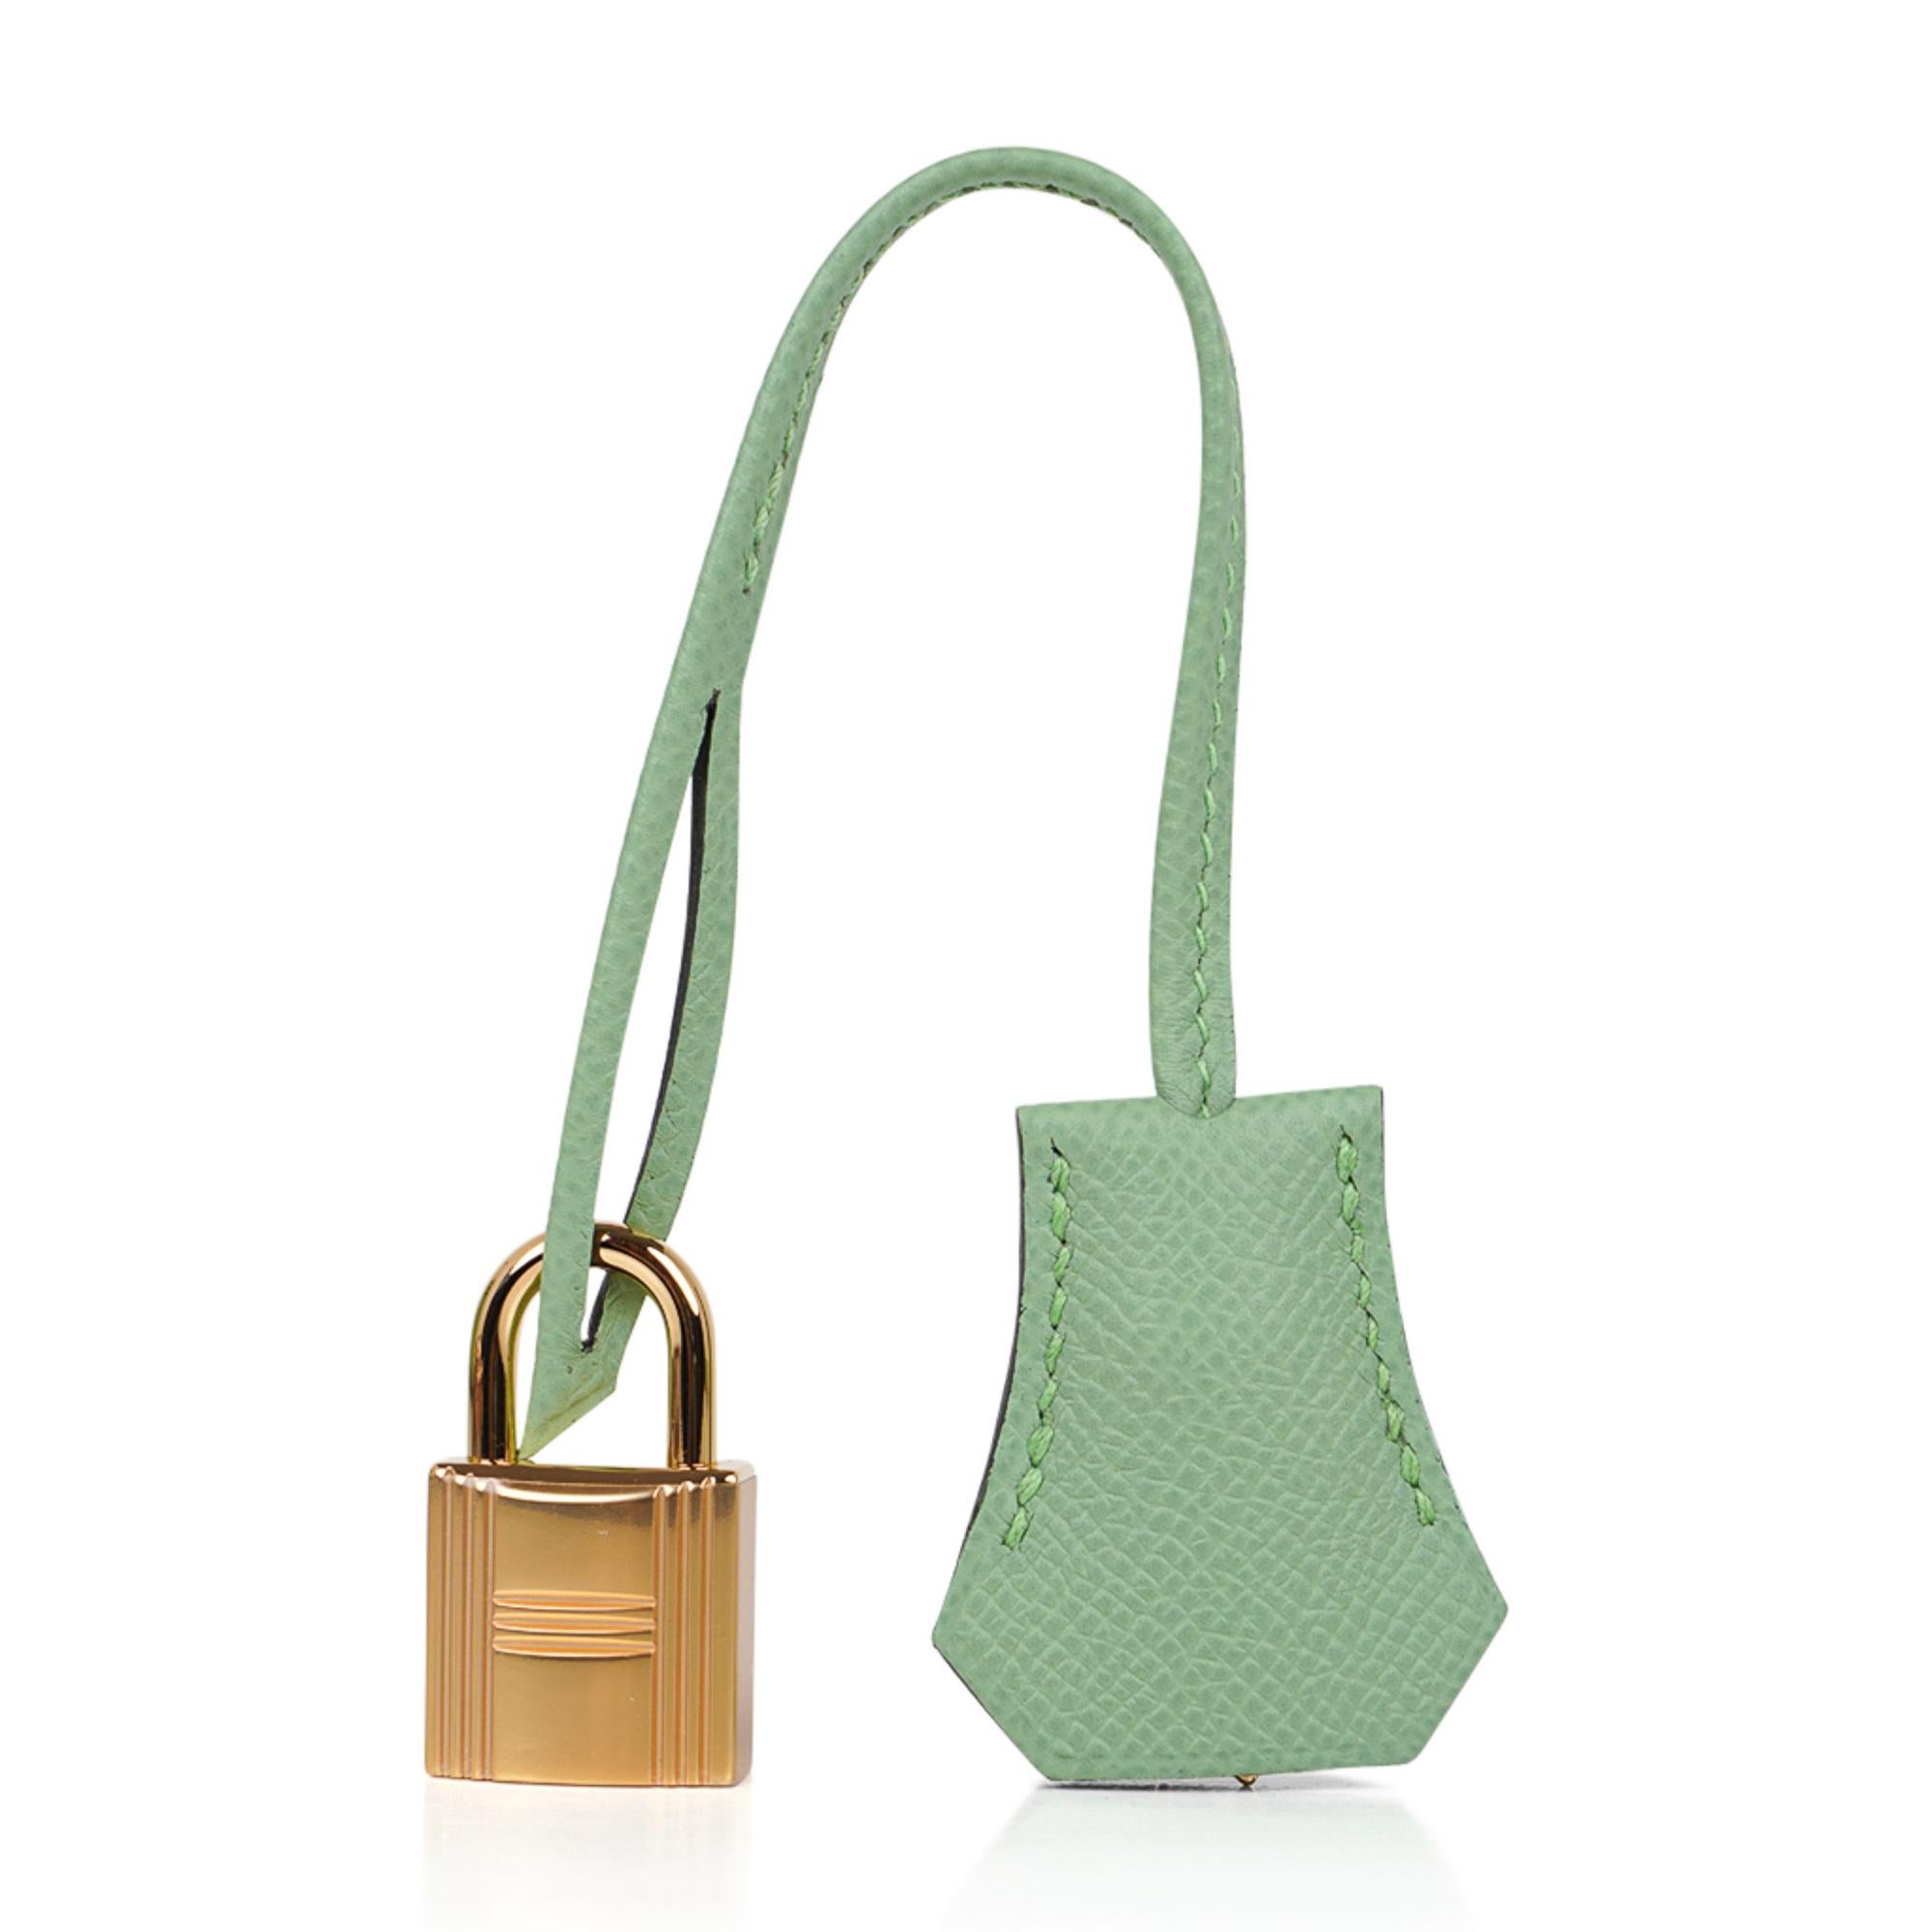 Guaranteed authentic Hermes Kelly Sellier 25 bag featured in fresh Vert Criquet. 
Stunning Hermes light green that is absolutely neutral. 
Luxurious with gold hardware. 
Comes with signature Hermes box, raincoat, shoulder strap, sleepers, lock, keys